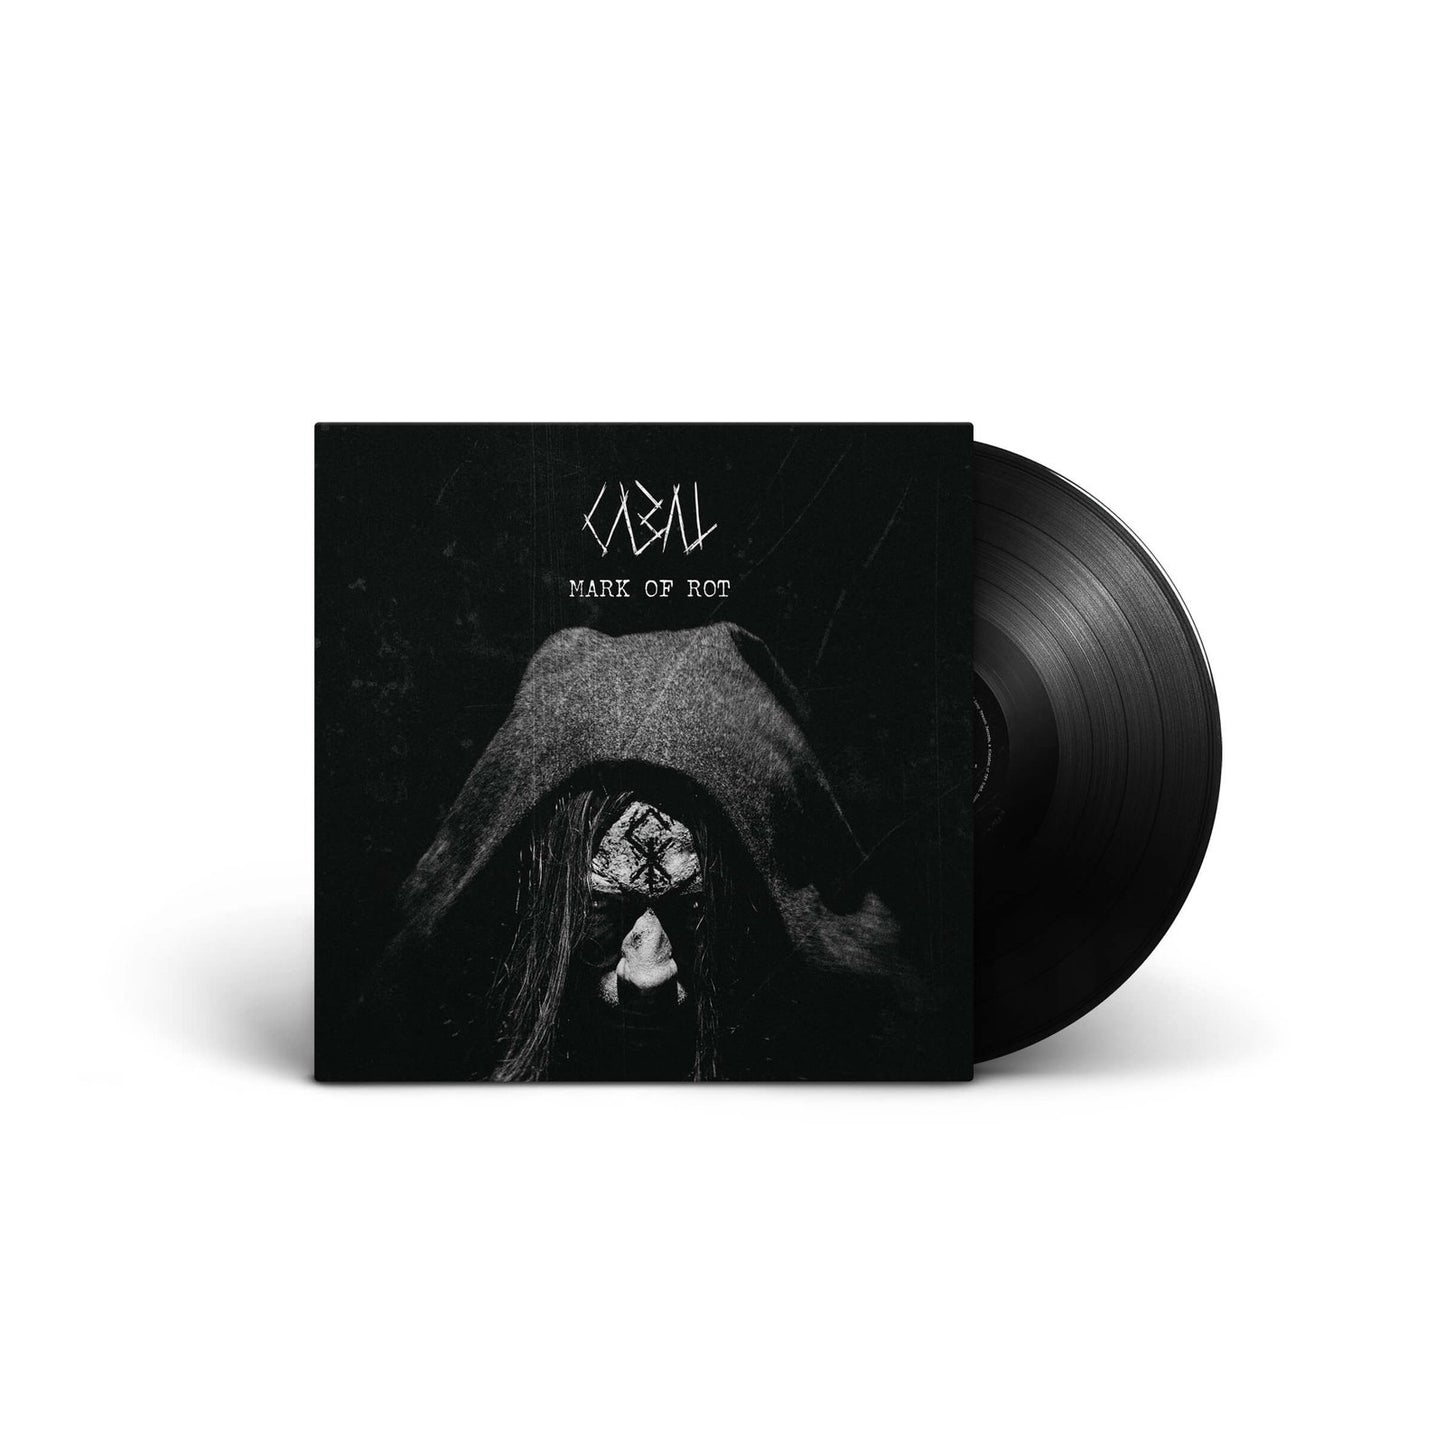 Cabal "Mark Of Rot" LP